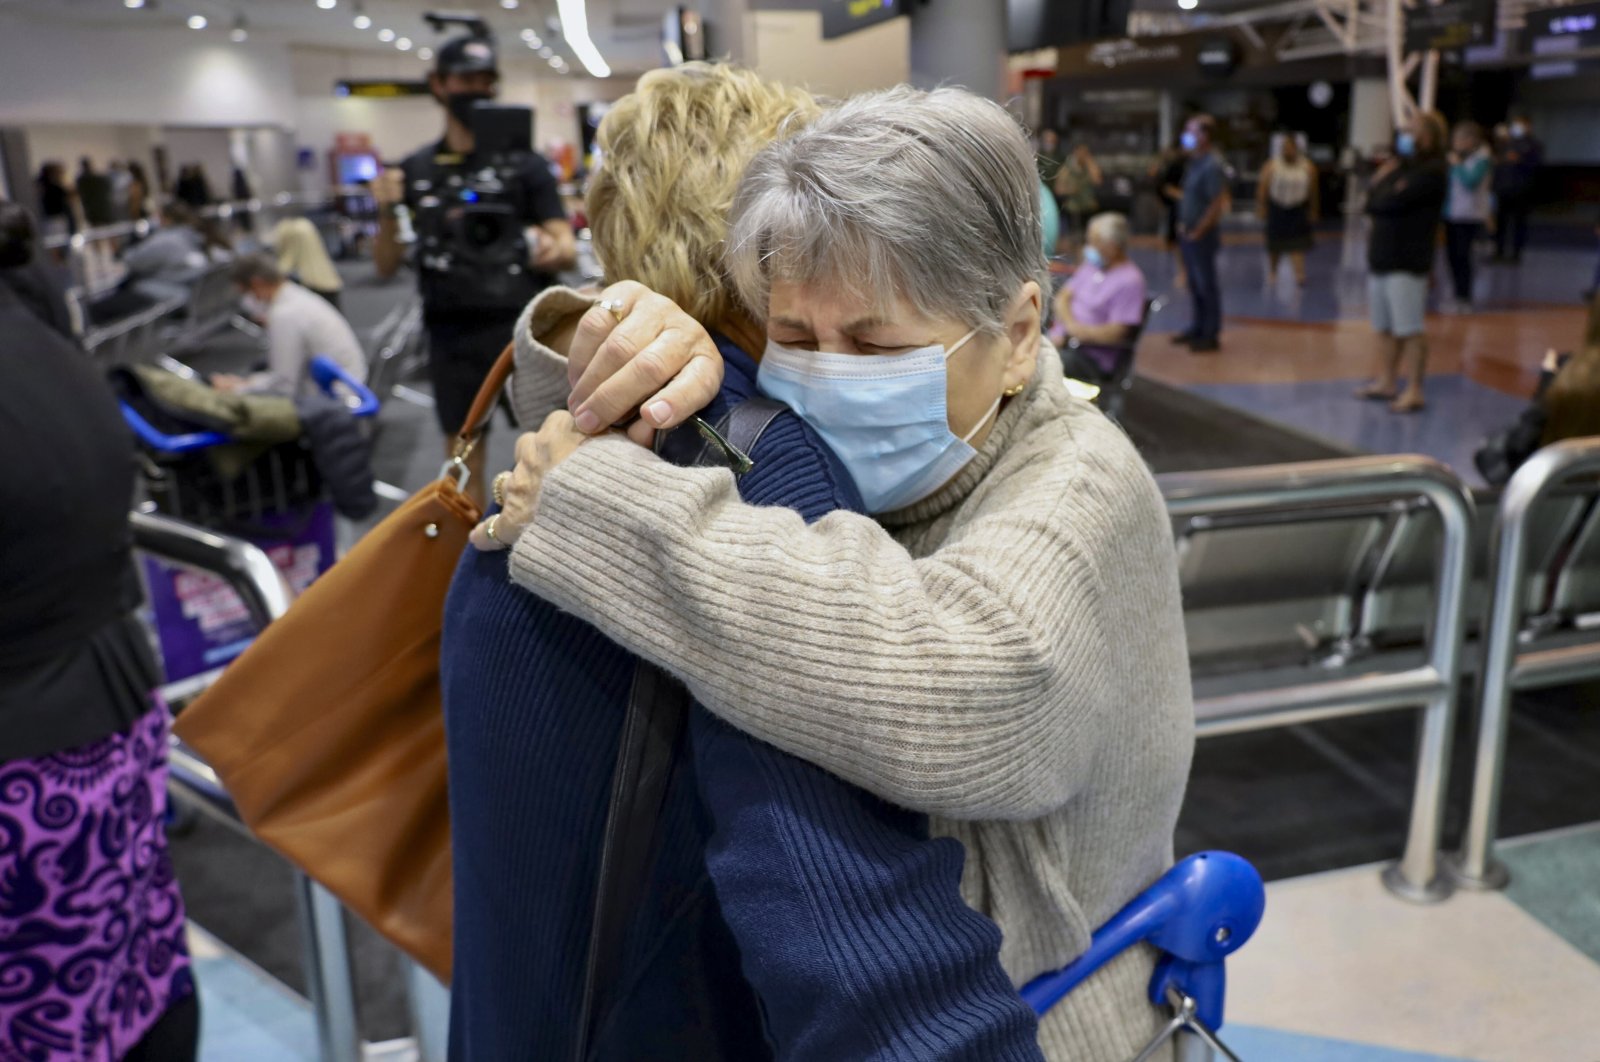 Families embrace after a flight from Los Angeles arrived at Auckland International Airport as New Zealand&#039;s border opened, May 2, 2022. (AP Photo)